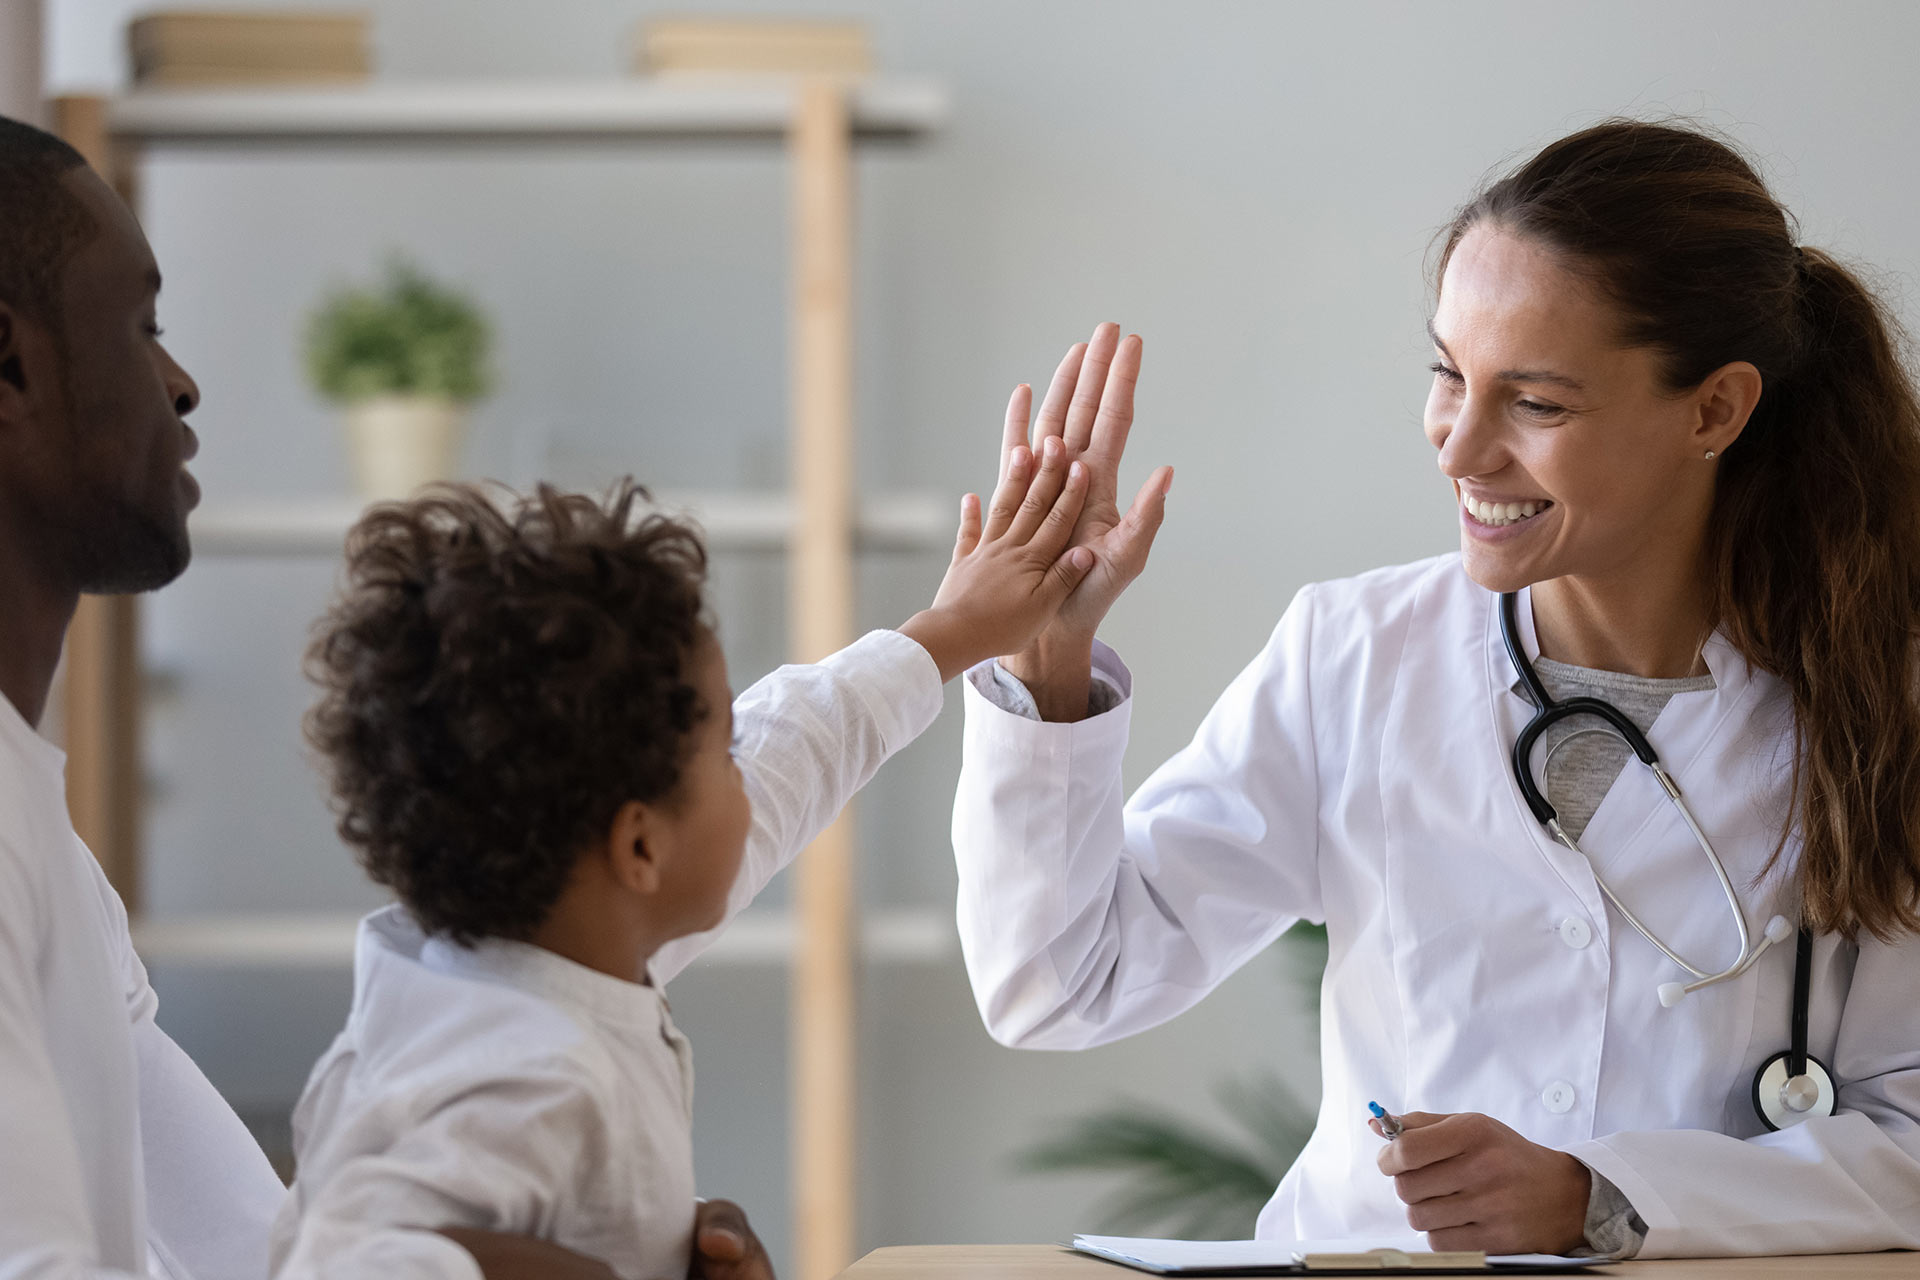 an image of a physician high fiving with her young patient while he sits on his dad's lap